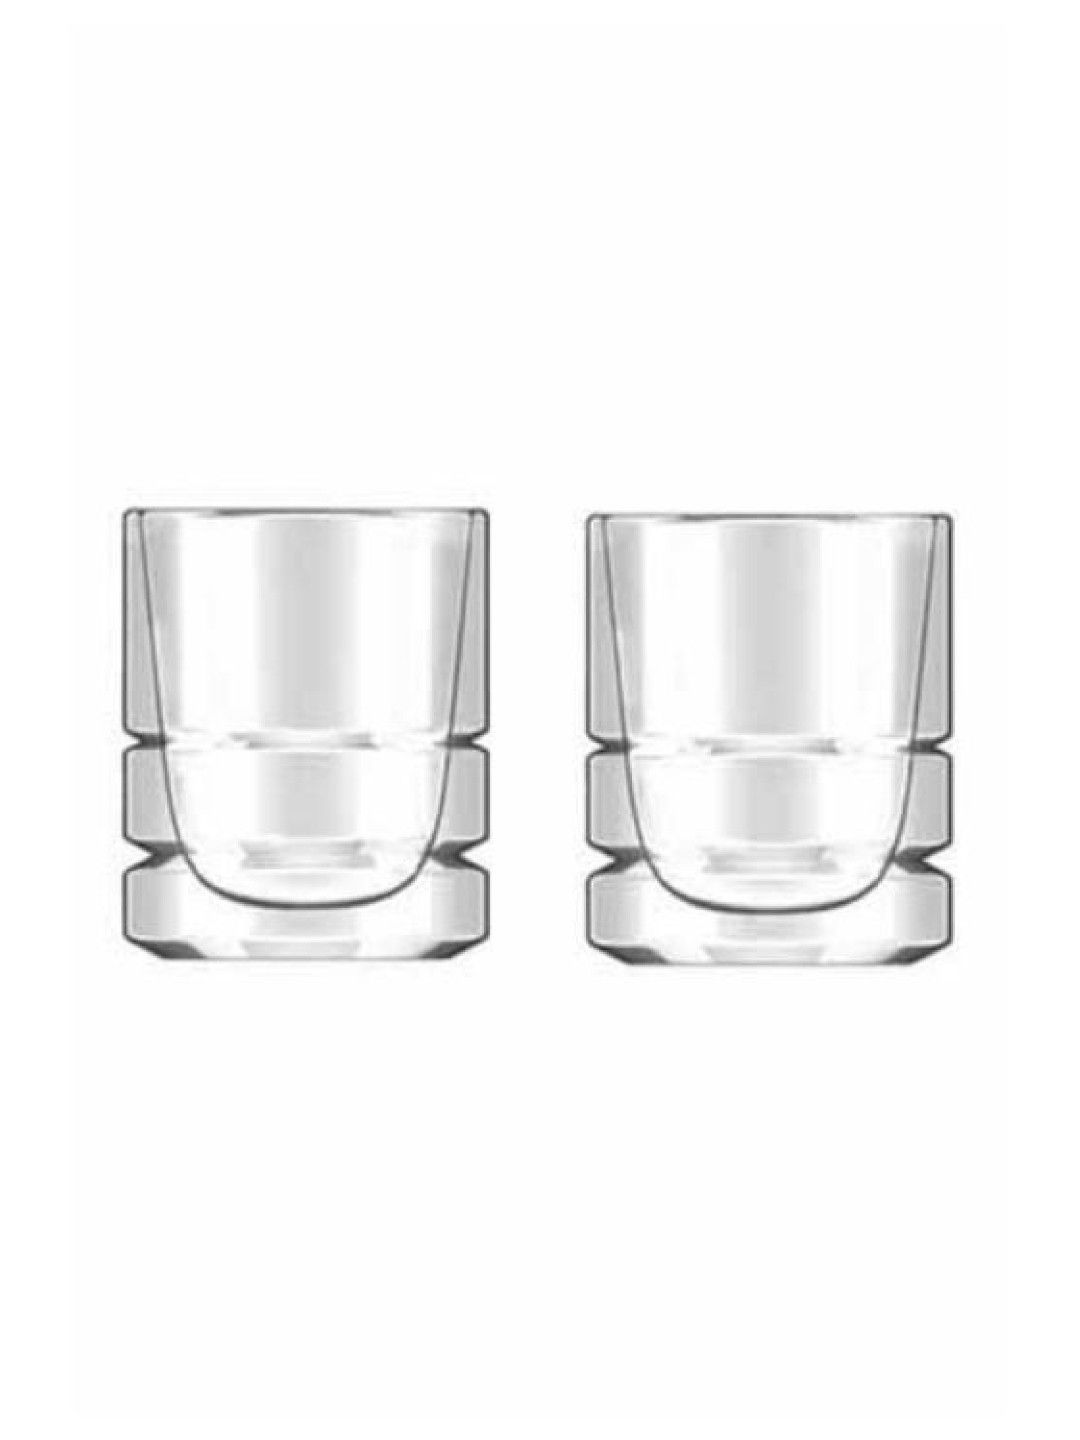 Sunbeams Lifestyle Crysalis Double Wall Glass Espresso Coffee Cup 80ml (Set of 2) (No Color- Image 2)